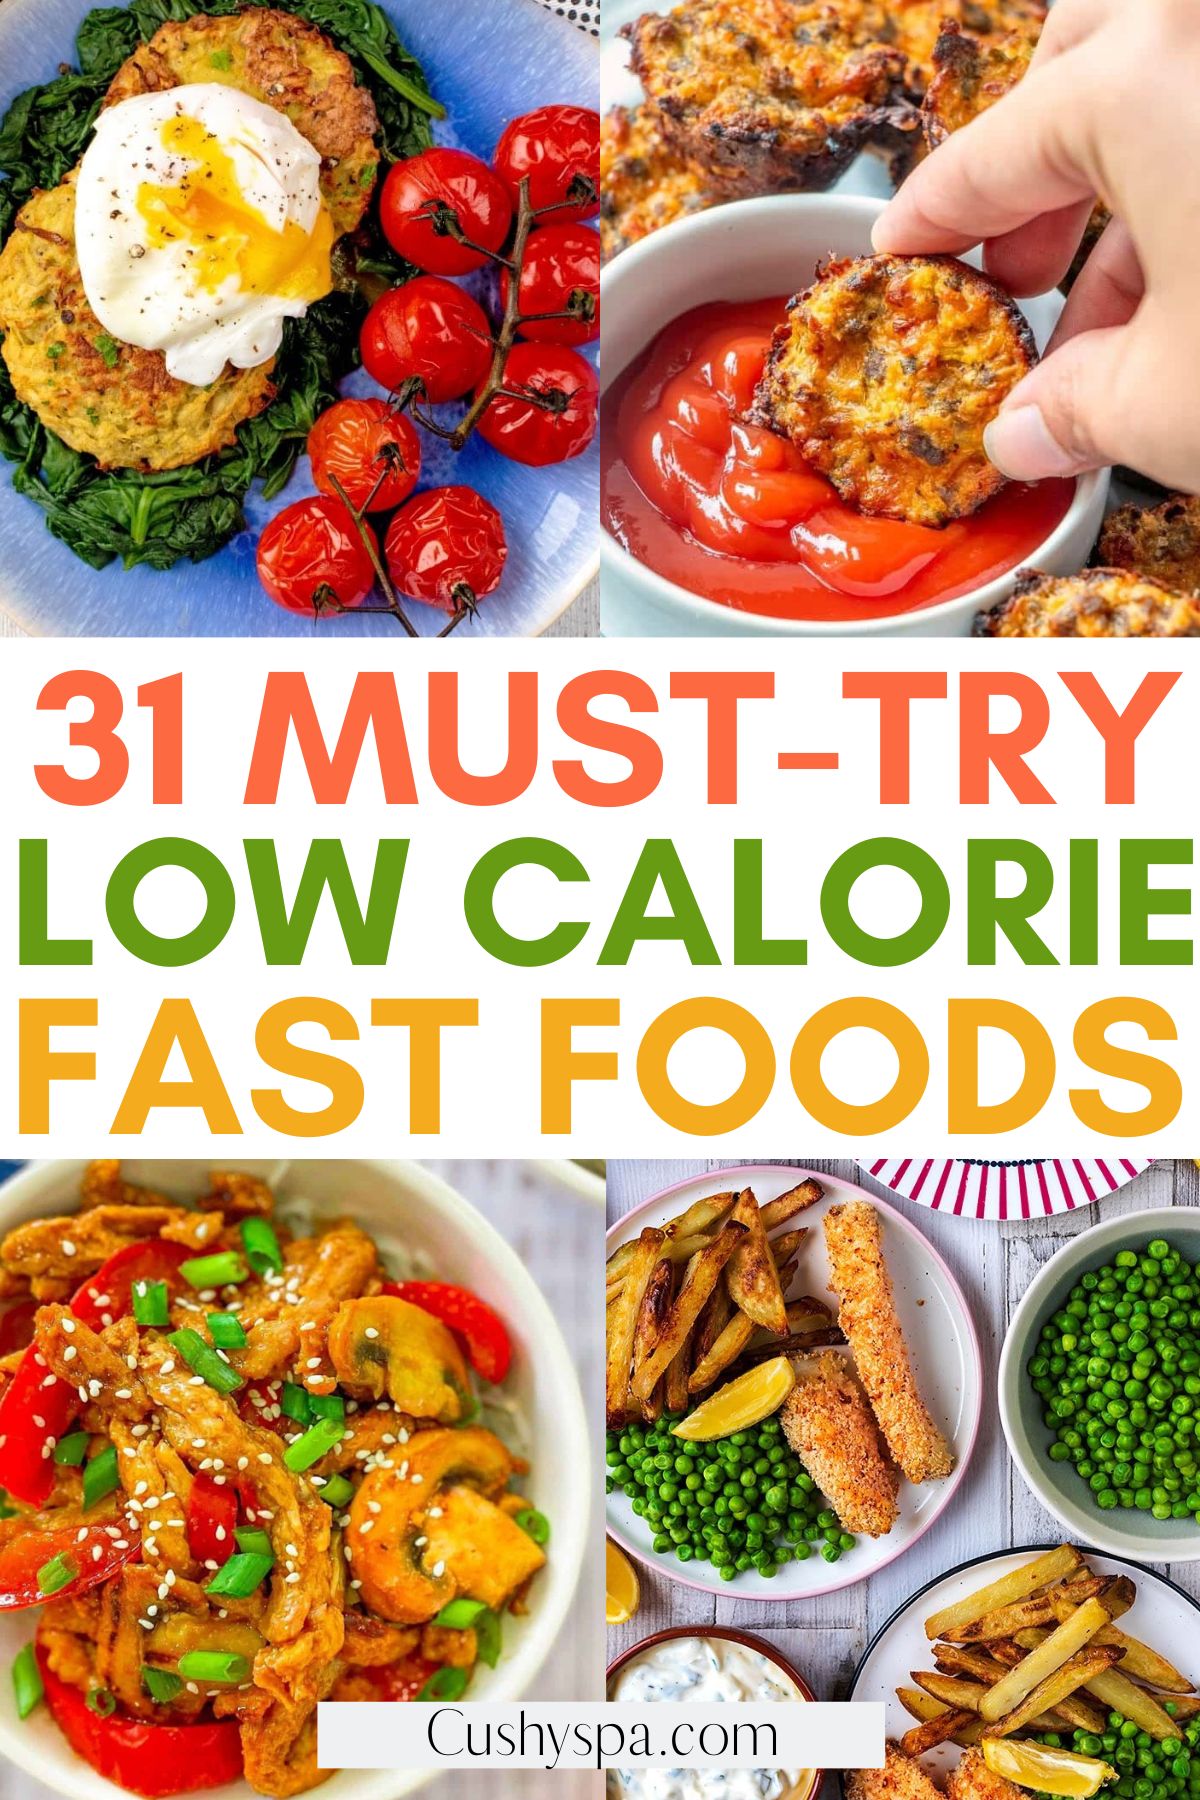 Must-Try Low Calorie Fast Foods